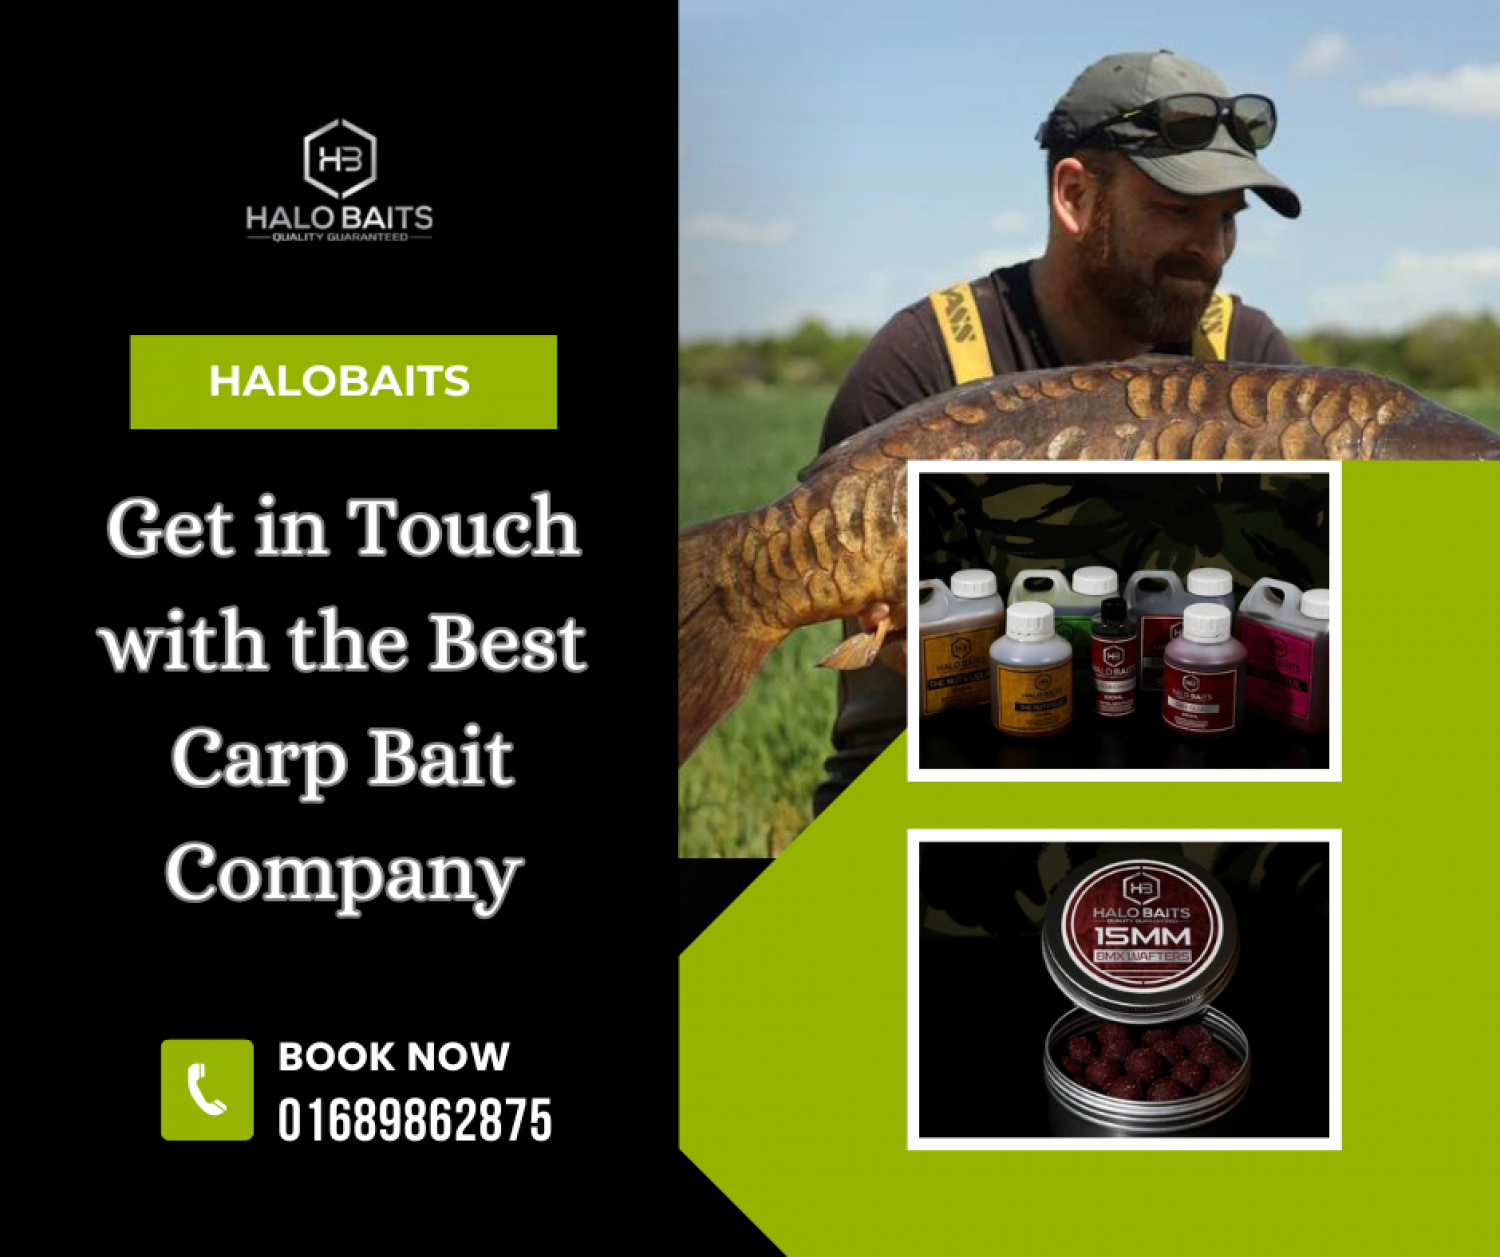 Halobaits | Get in Touch with the Best Carp Bait Company Infographic